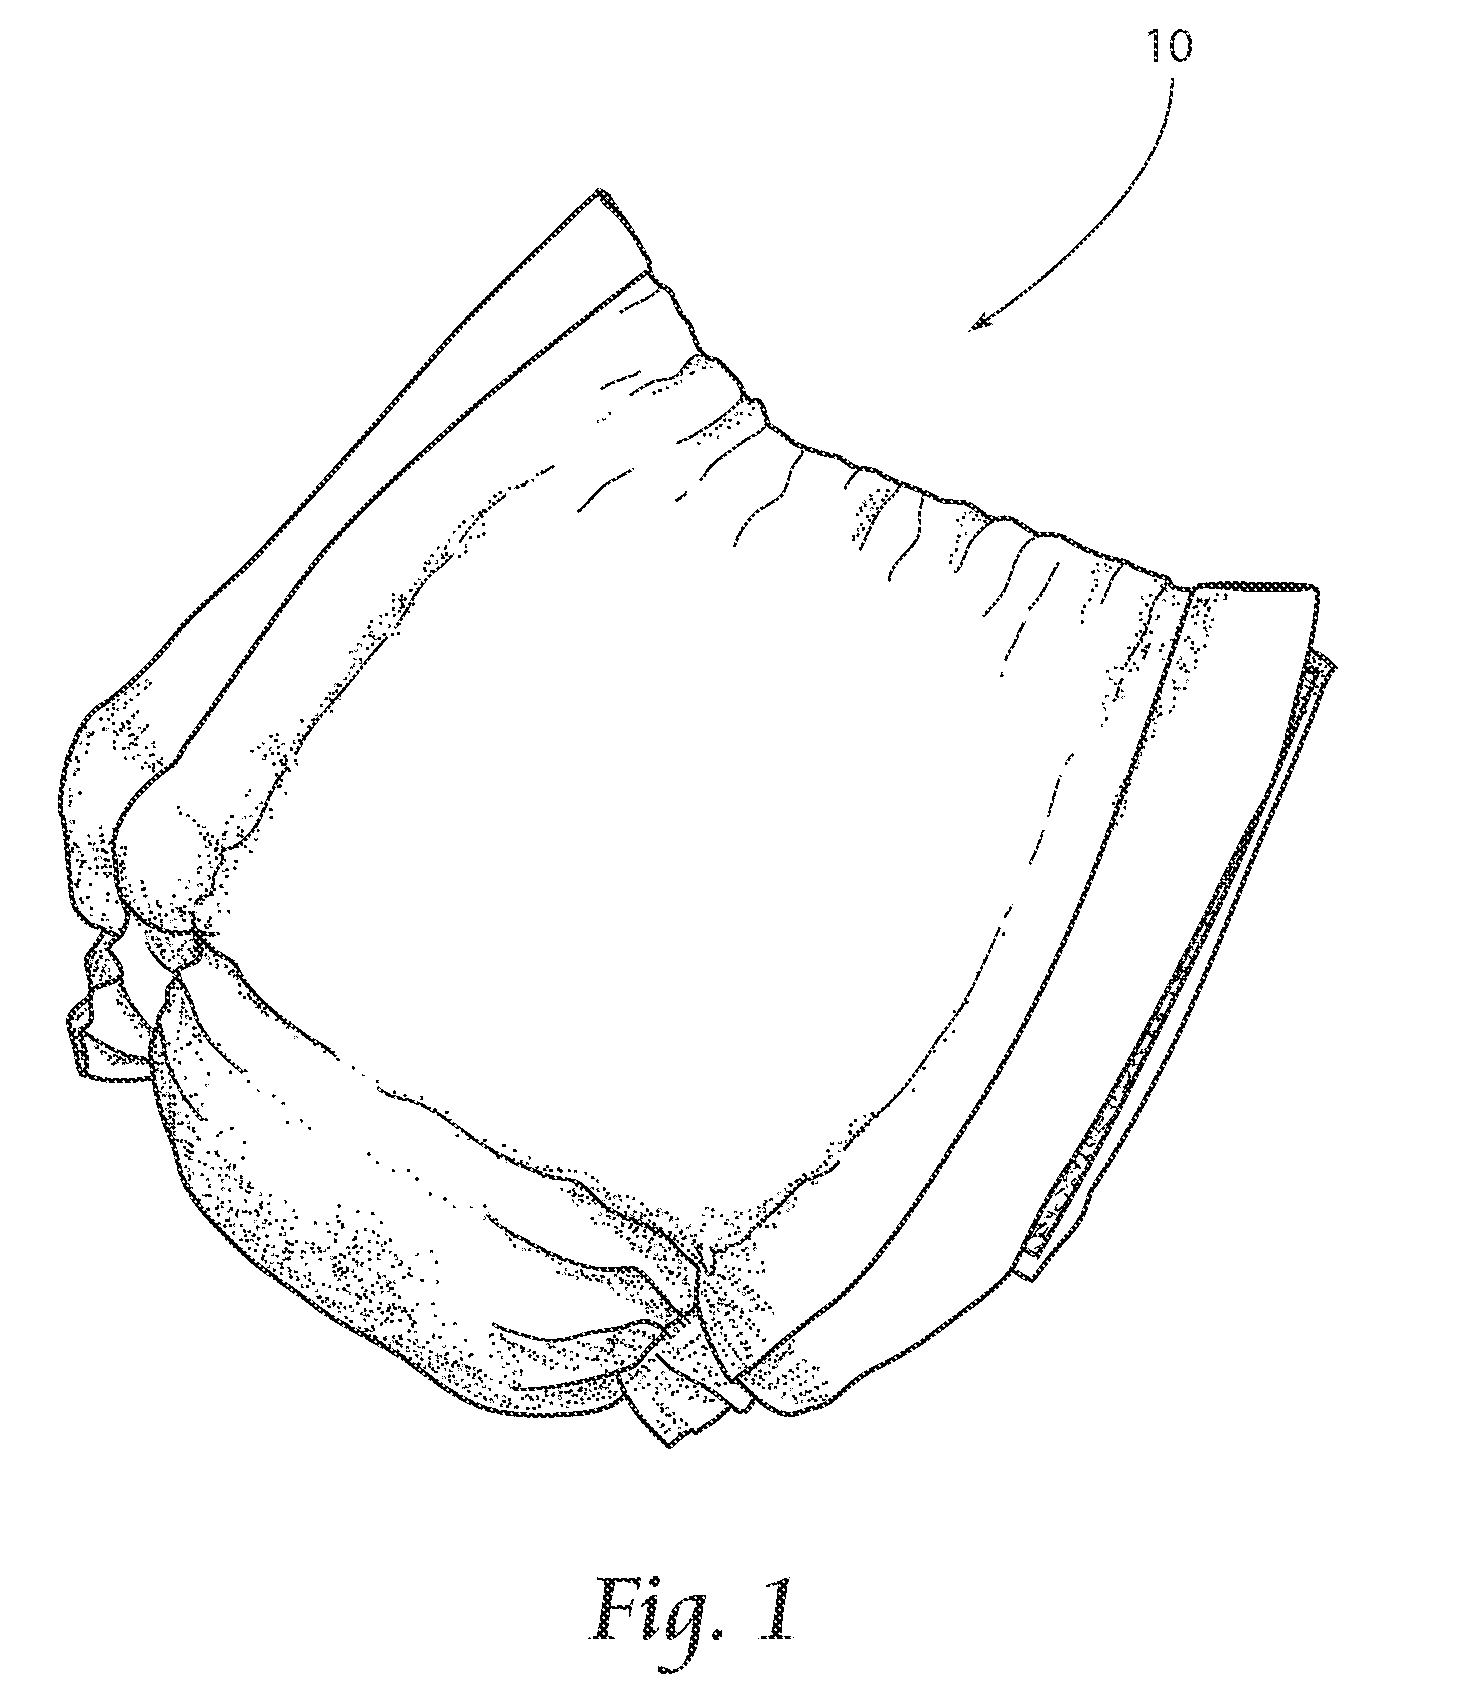 Apparatus and method for forming a pant-type diaper with refastenable side seams